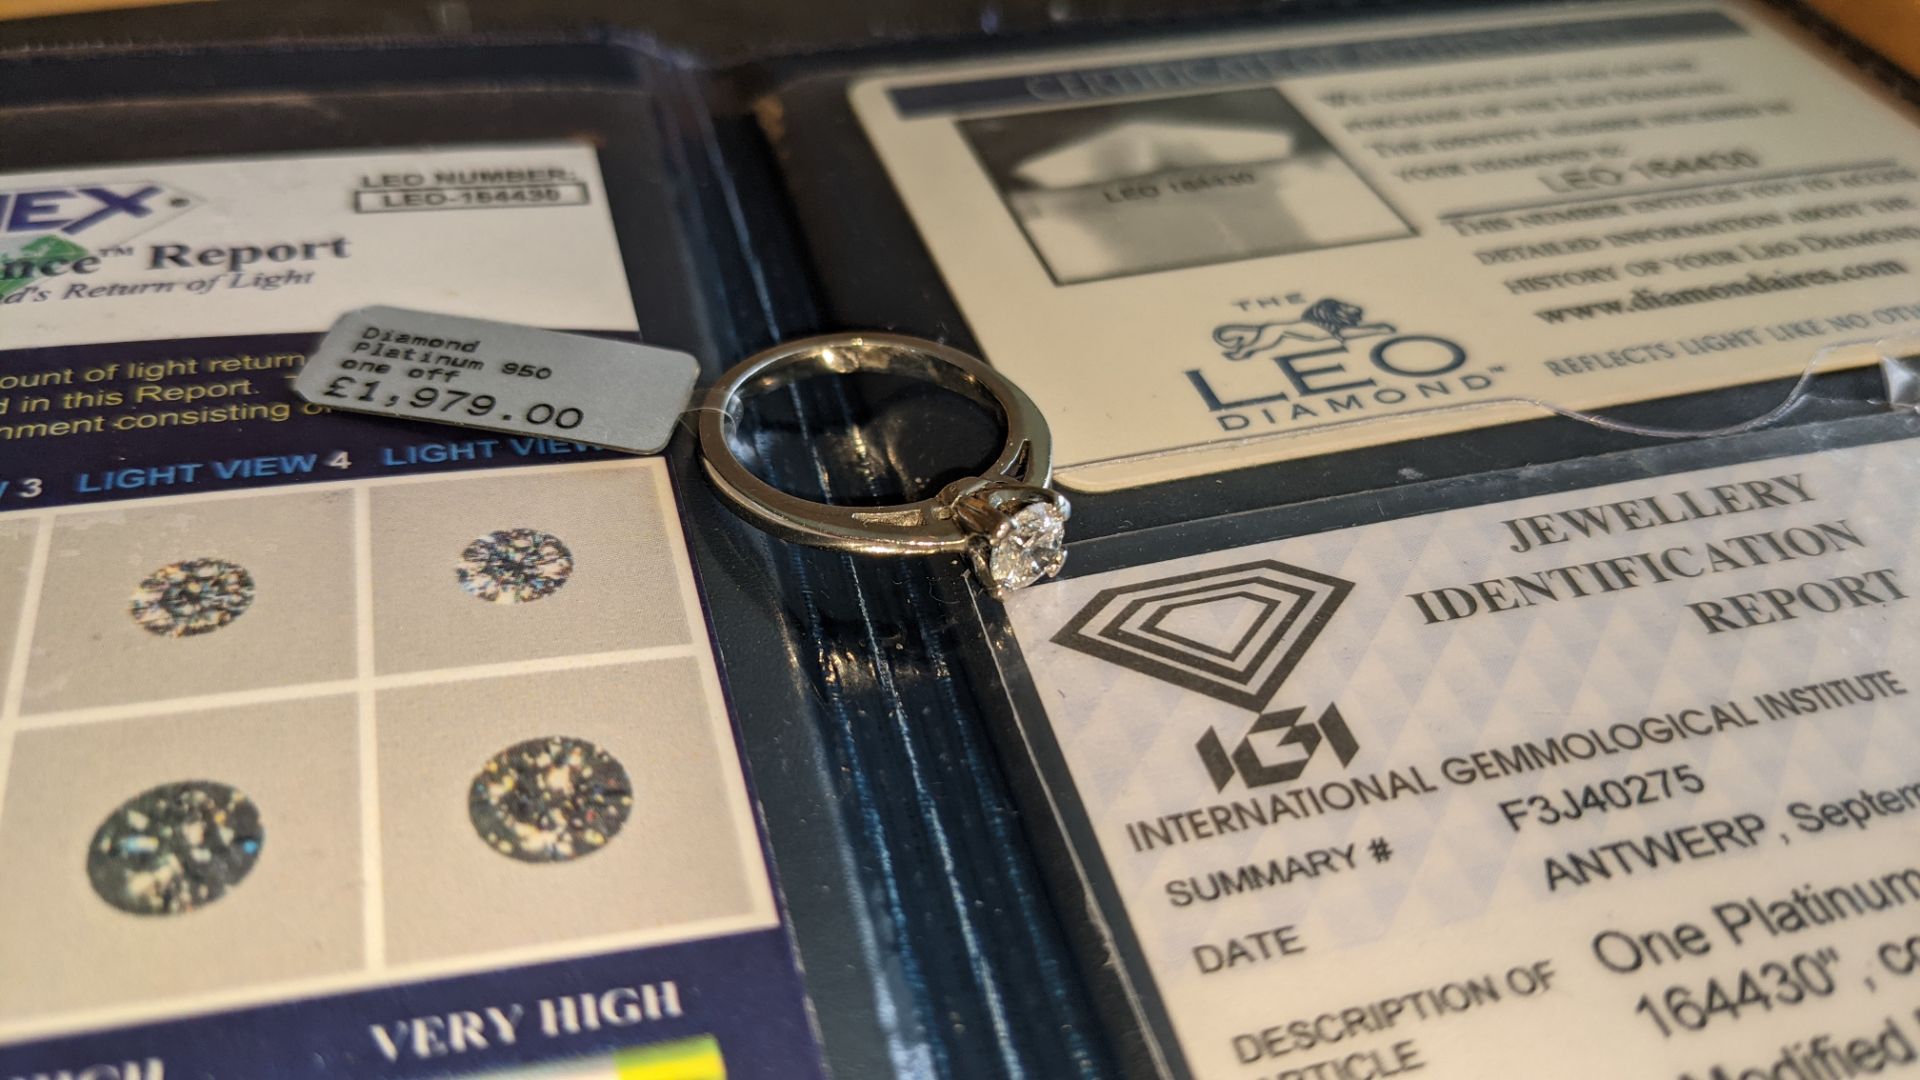 Platinum 950 ring with 0.50ct diamond. Includes diamond report/certification indicating the central - Image 21 of 25